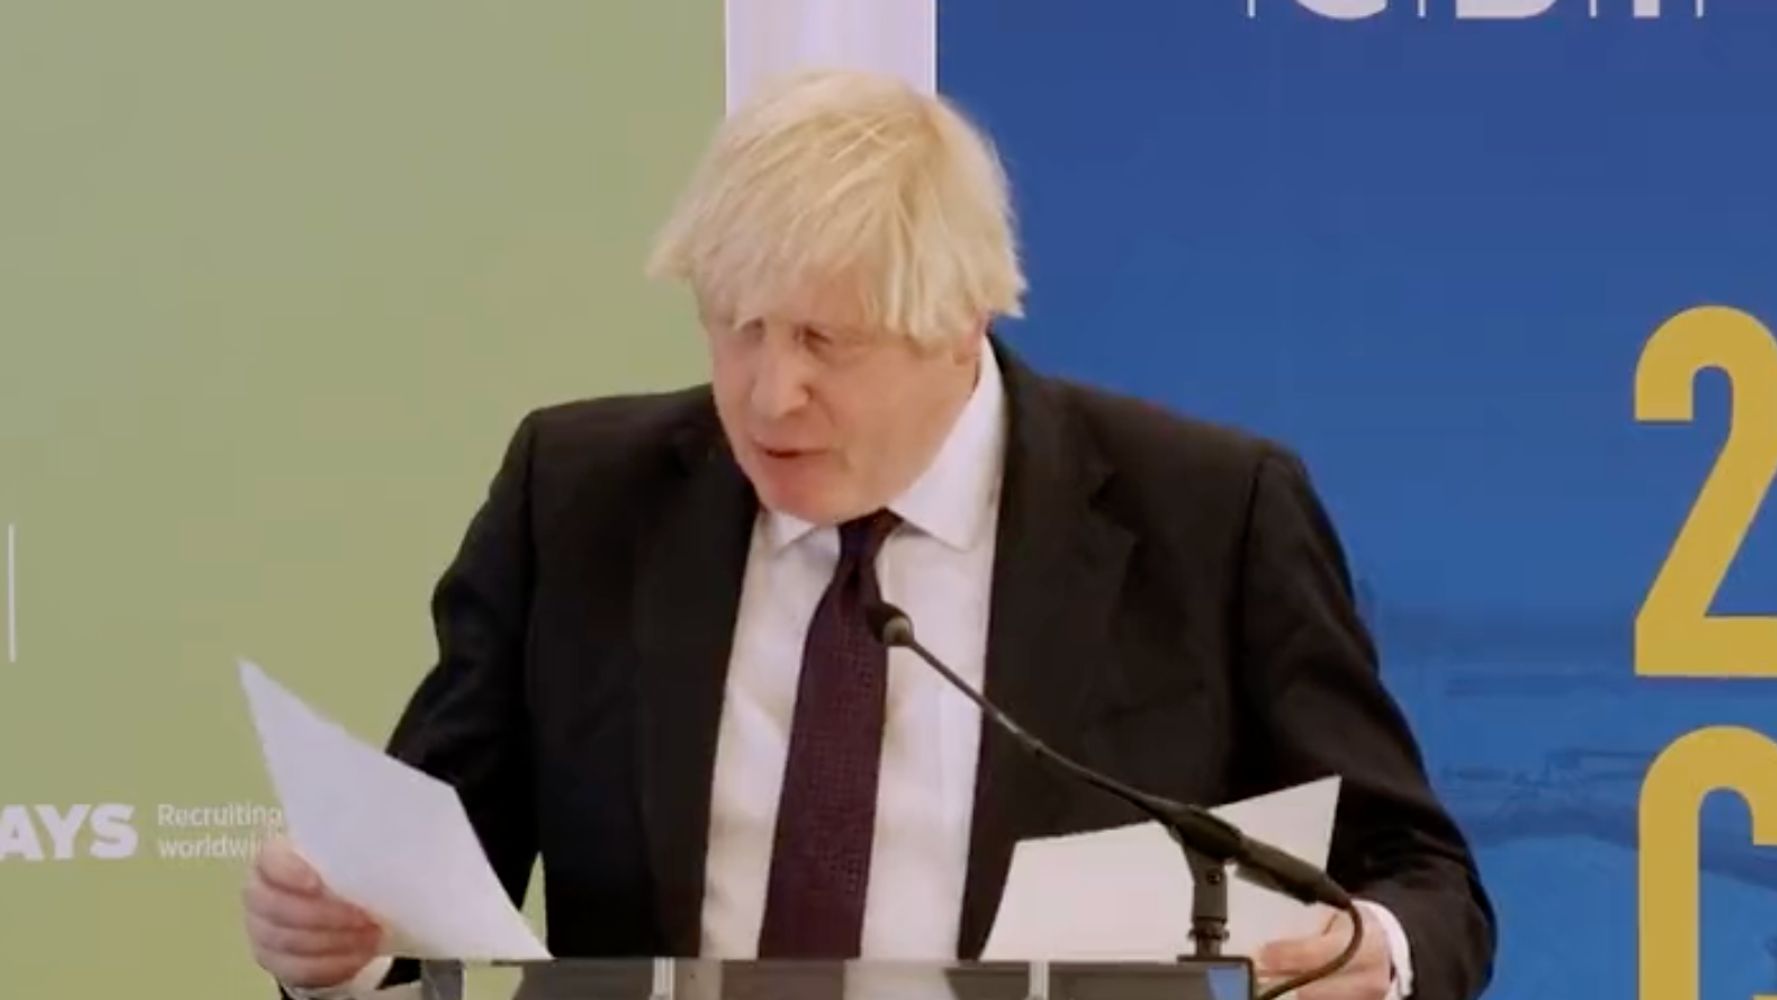 Boris Johnson Gets Lost During His Own Speech To Business Leaders - DUK ...